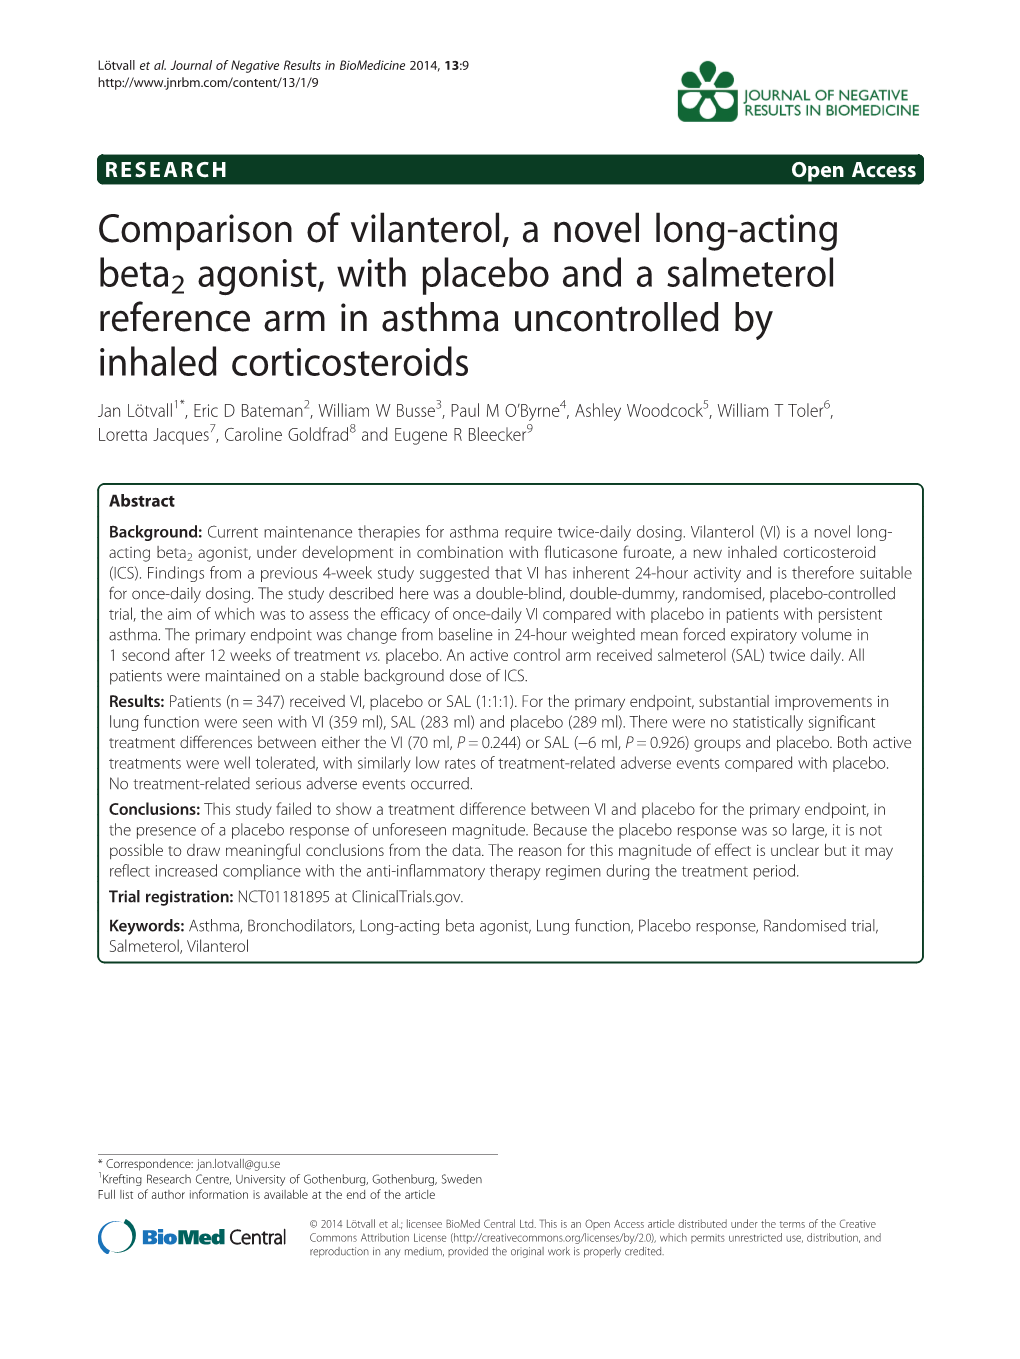 Comparison of Vilanterol, a Novel Long-Acting Beta2 Agonist, With